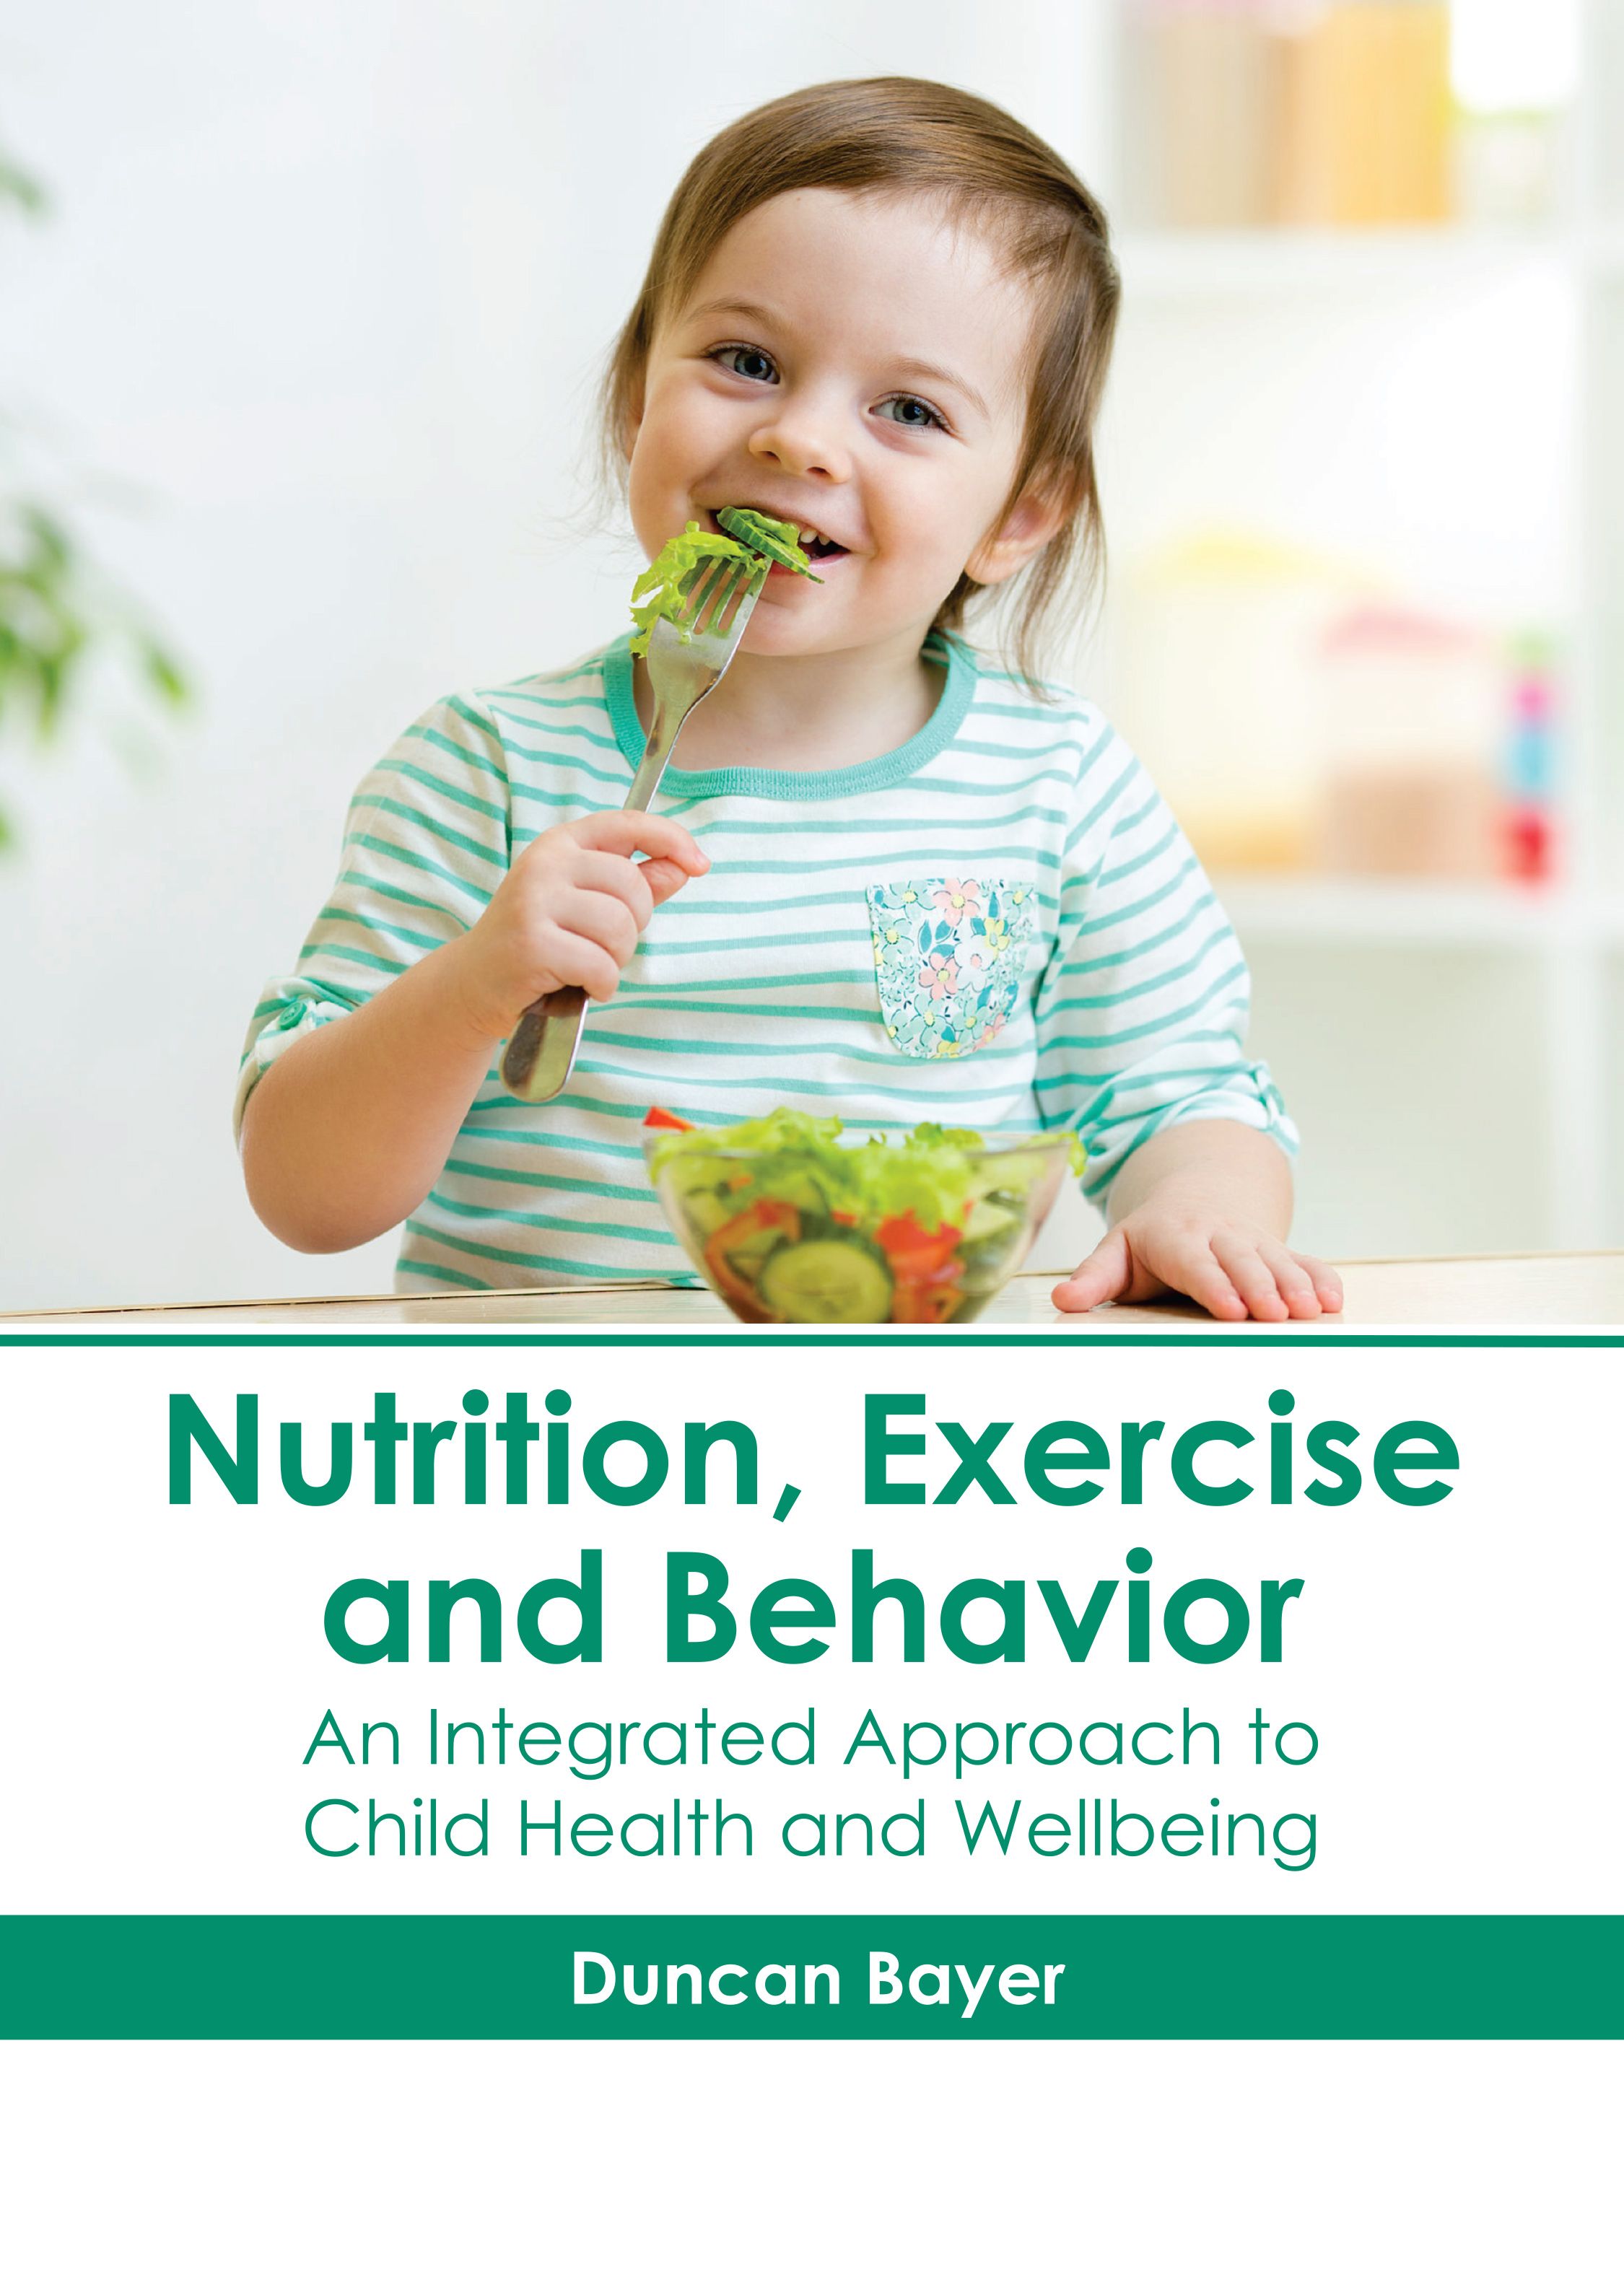 NUTRITION, EXERCISE AND BEHAVIOR: AN INTEGRATED APPROACH TO CHILD HEALTH AND WELLBEING